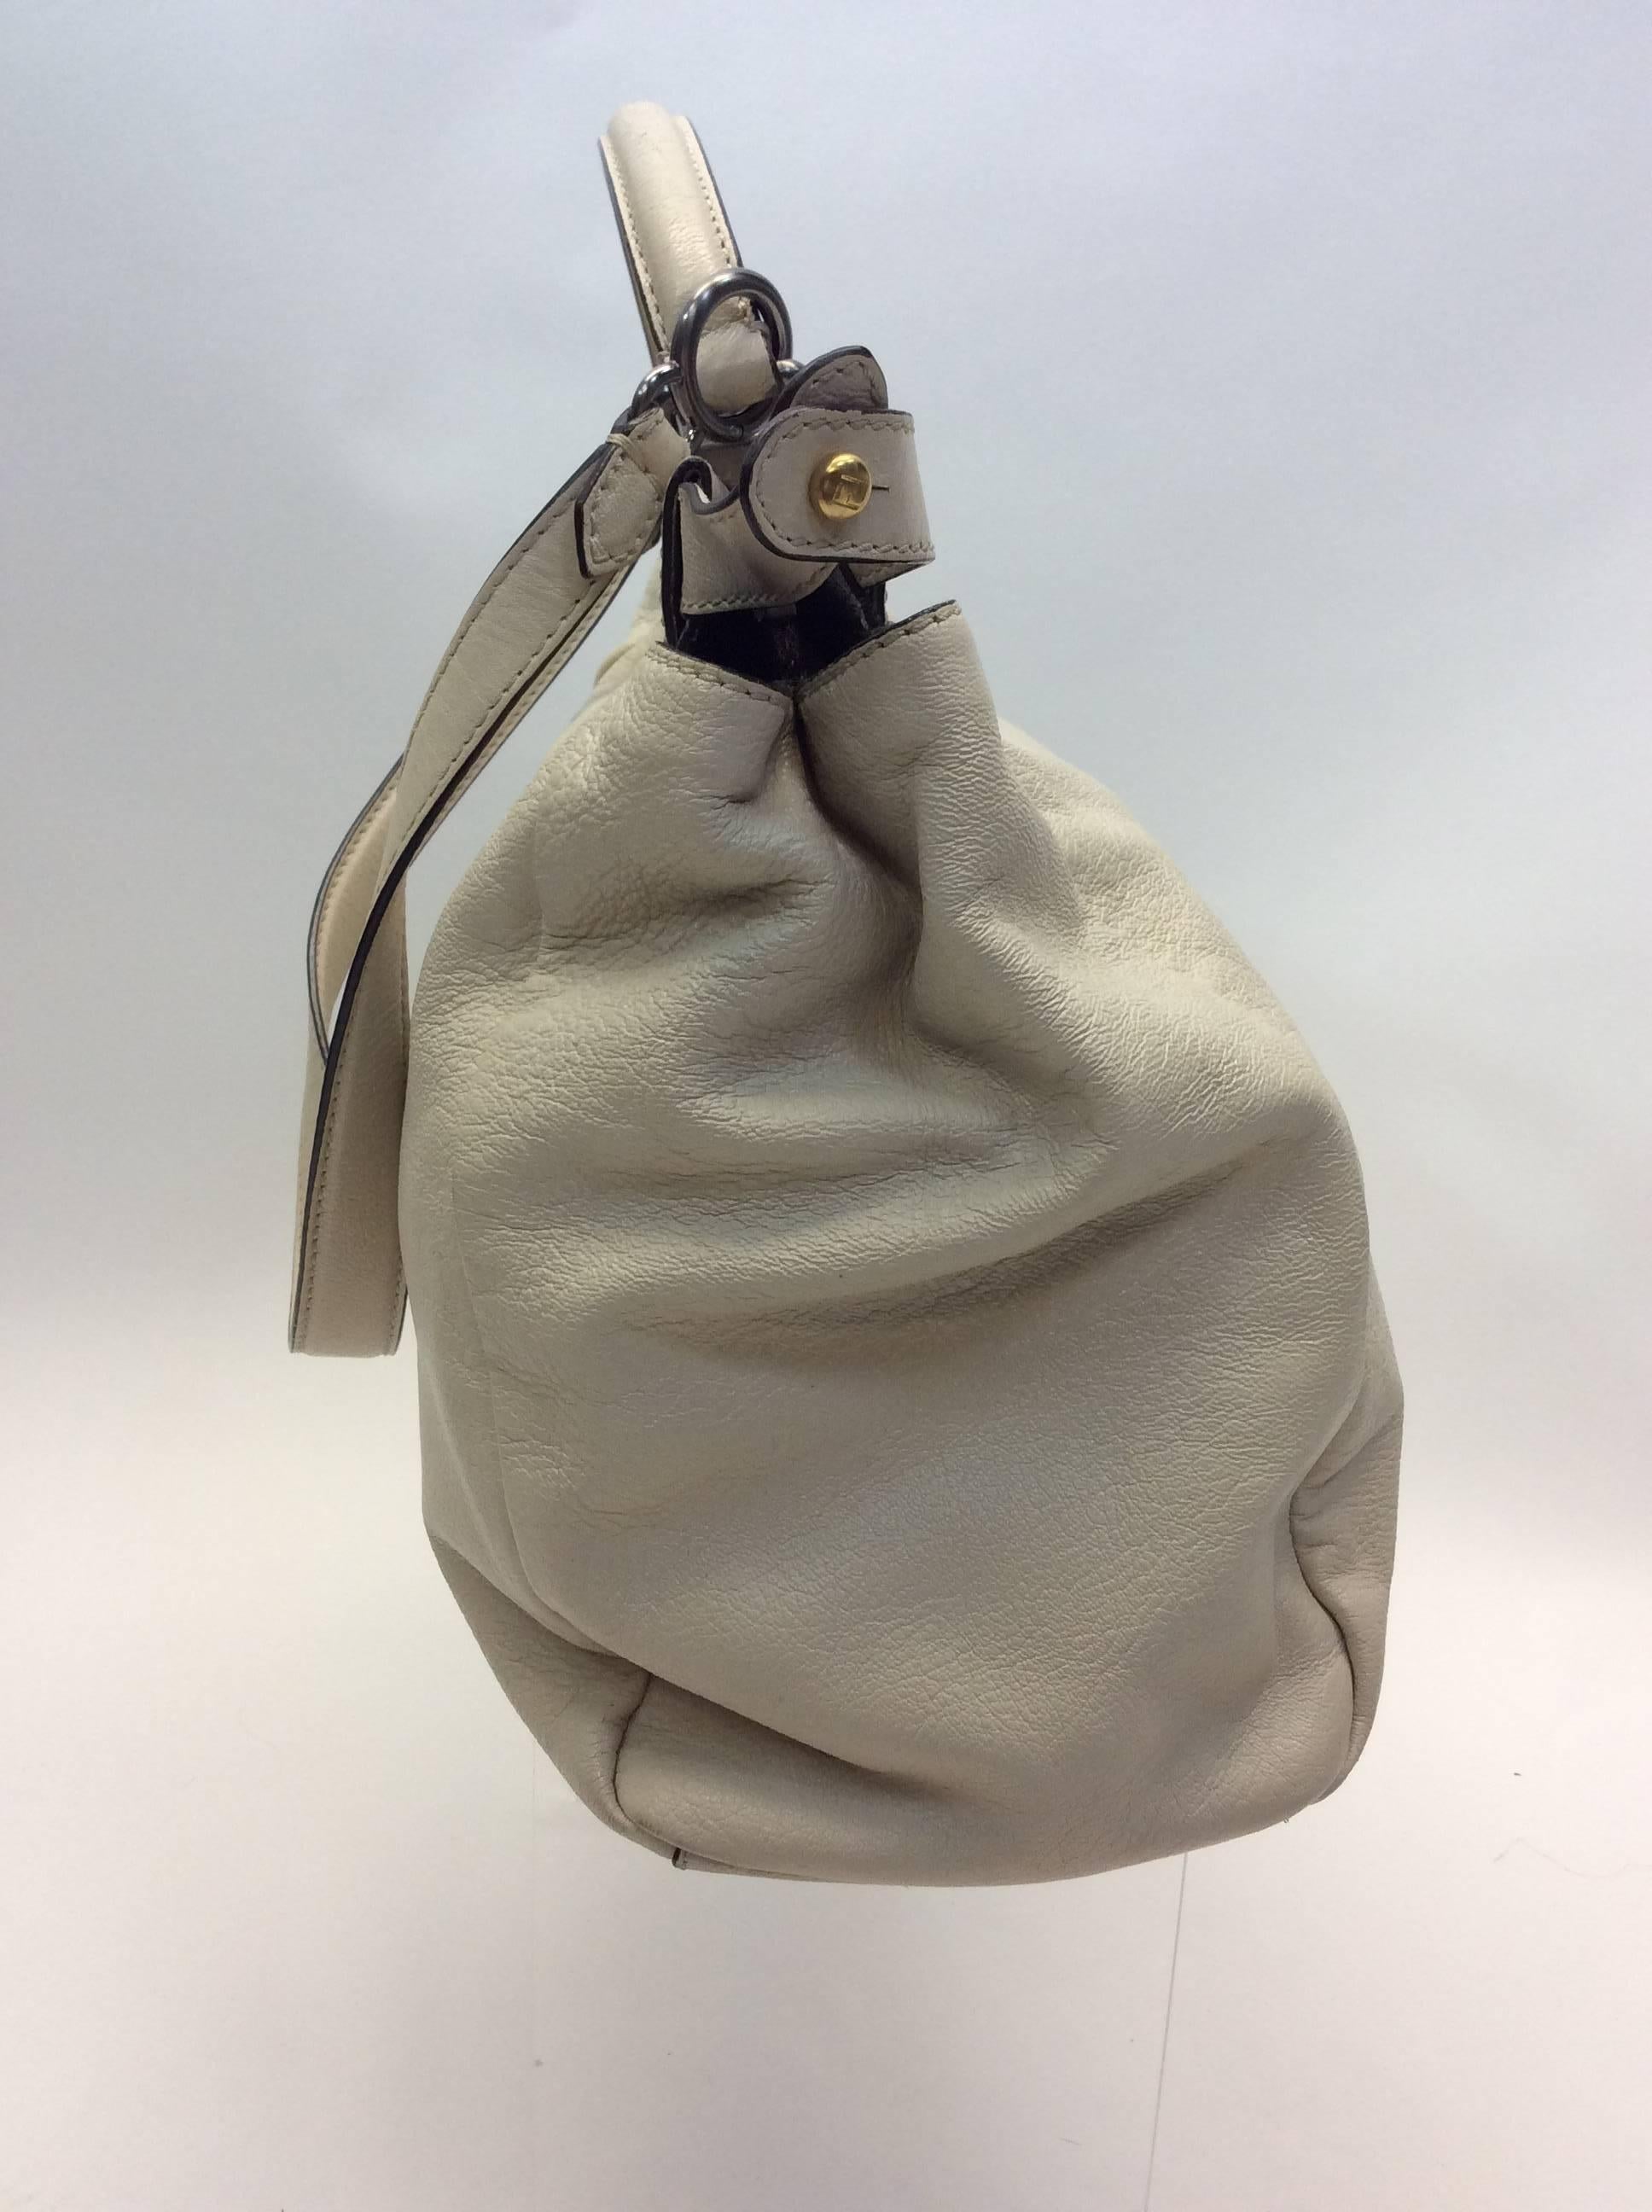 Fendi White Ombre Peek-A-Boo Purse In Excellent Condition For Sale In Narberth, PA